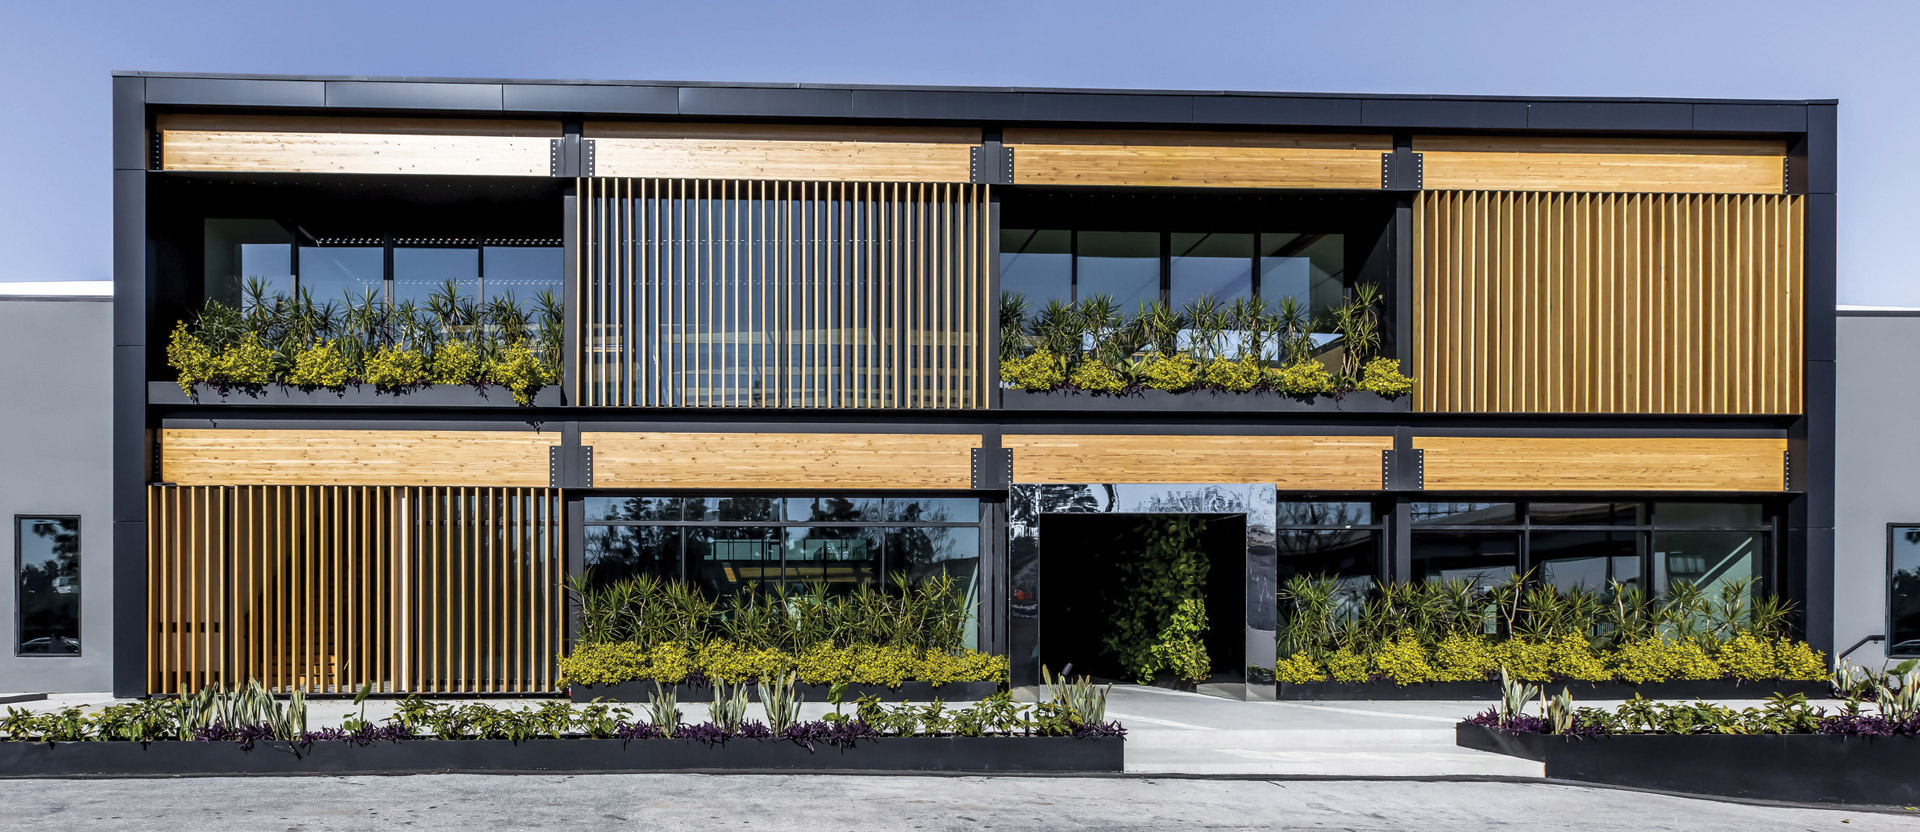 Modern two-story commercial building featuring a balanced mix of materials with horizontal wood paneling, vertical metal louvers, and generous windows framed by black trim. Lush green planters add a natural touch to the sleek, contemporary design.